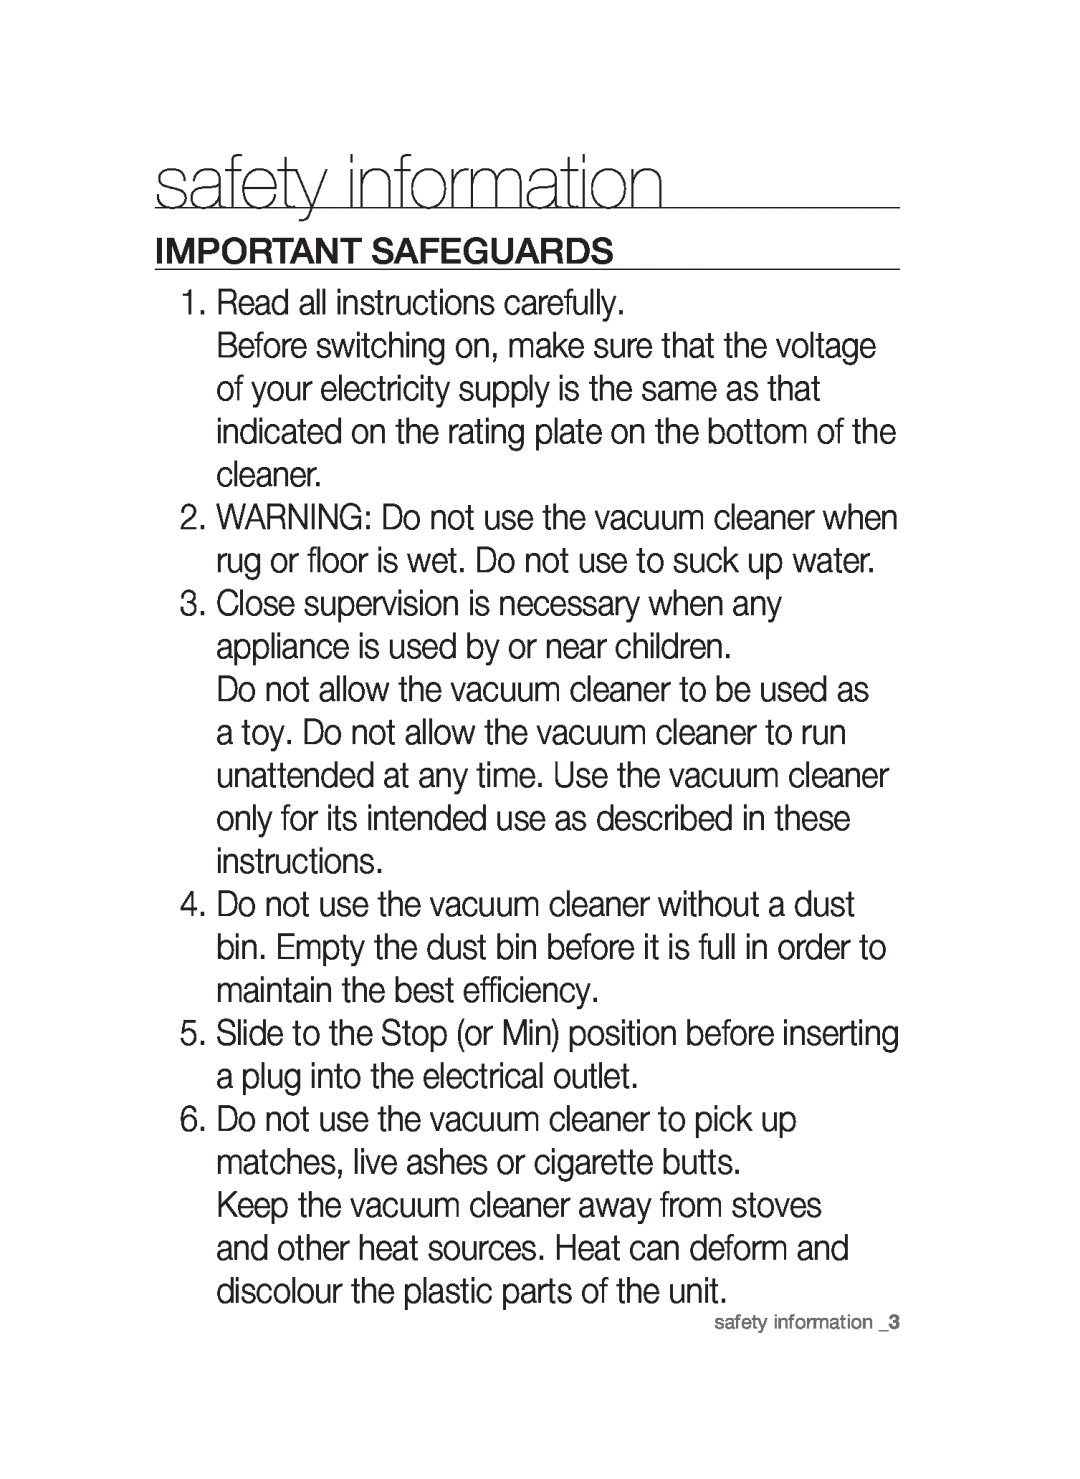 Samsung VCC45W0S3B/XEO, VCC45S0S3R/XEF manual safety information, IMPORTANT SAFEGUARDS 1. Read all instructions carefully 